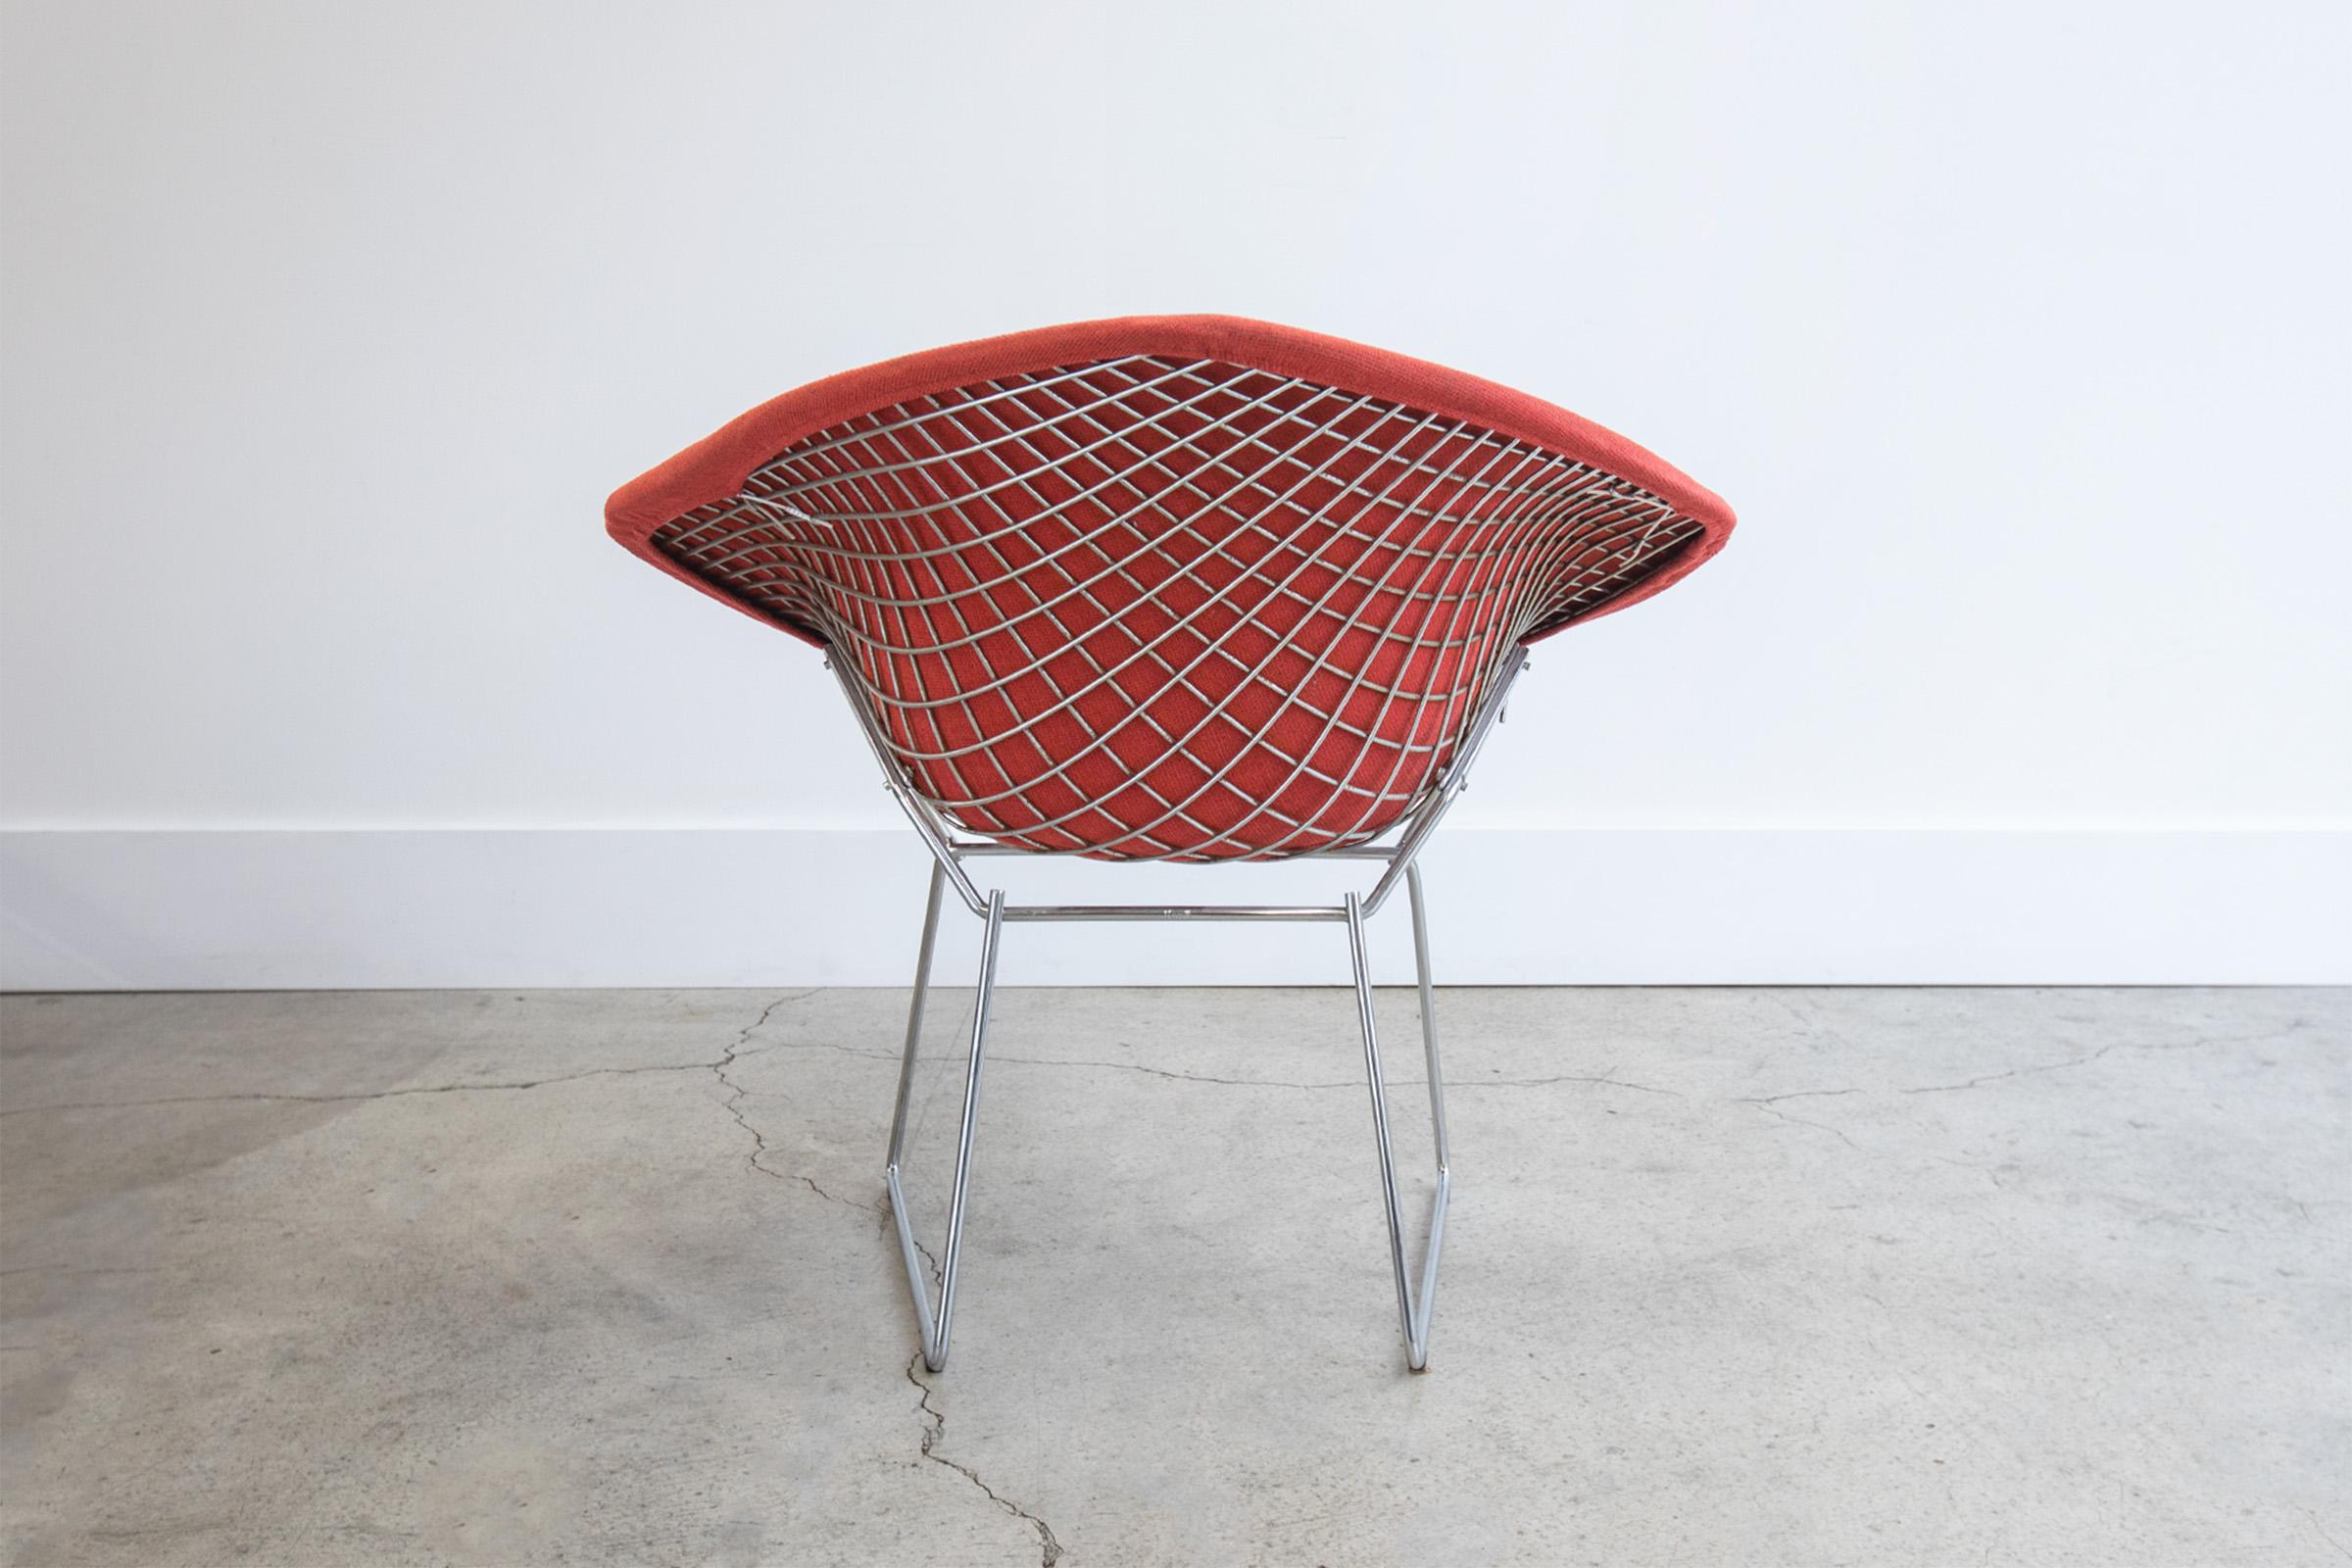 Vintage all original 1970s Knoll Bertoia Diamond lounge chair by Harry Bertoia. Features chrome roads precisely interwoven and welded to create airy sculpture seats. Despite their delicate filigreed appearance, the chairs are supremely strong. Comes